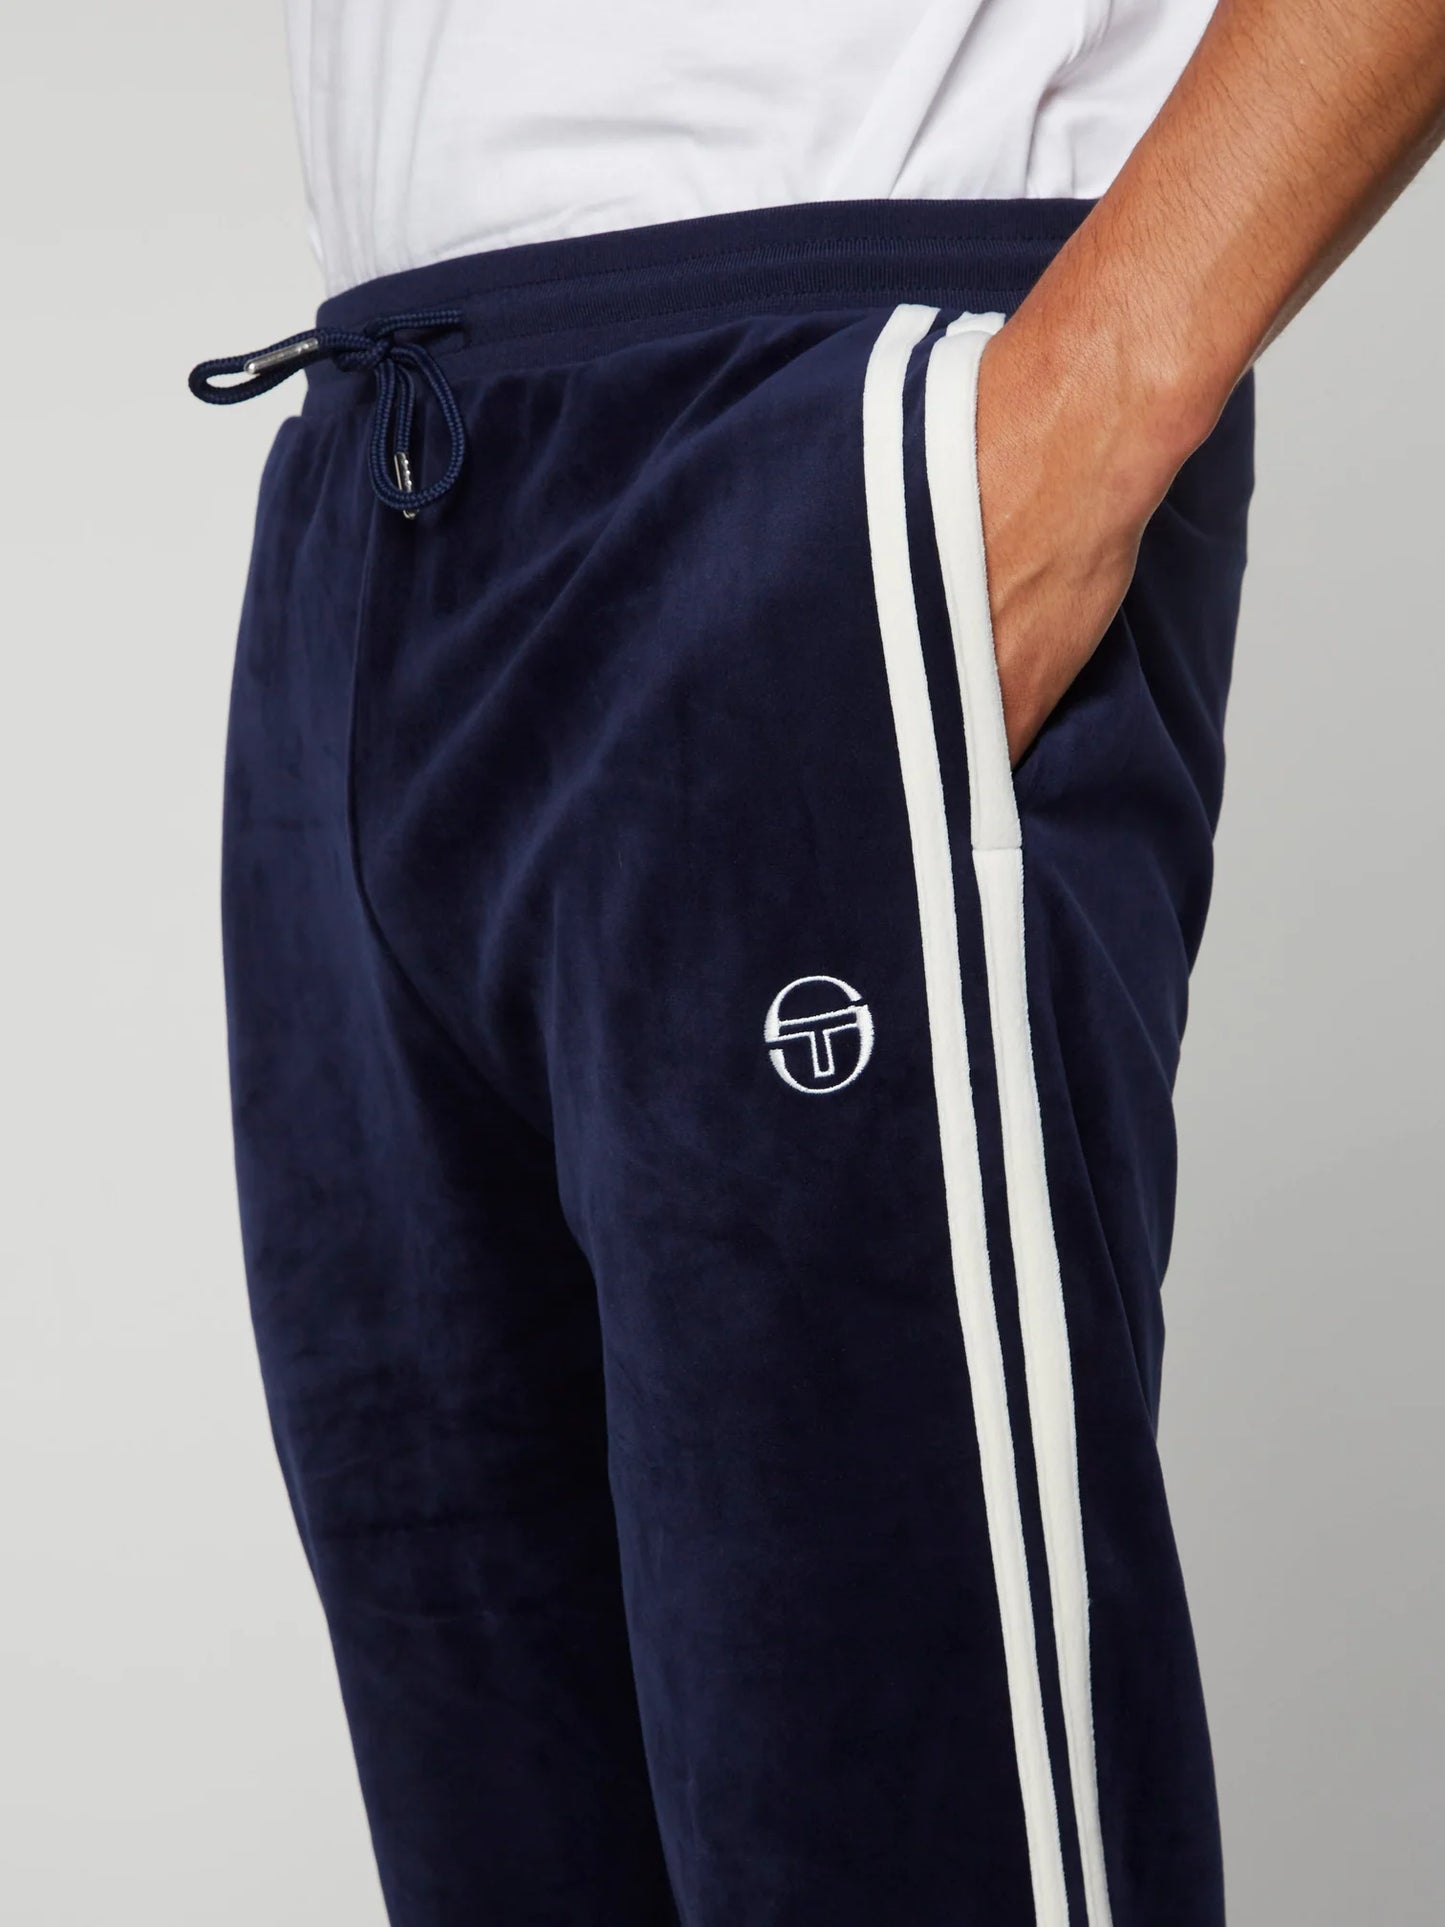 DAMARINDO VELOUR (Only sold as a set) - MARITIME BLUE